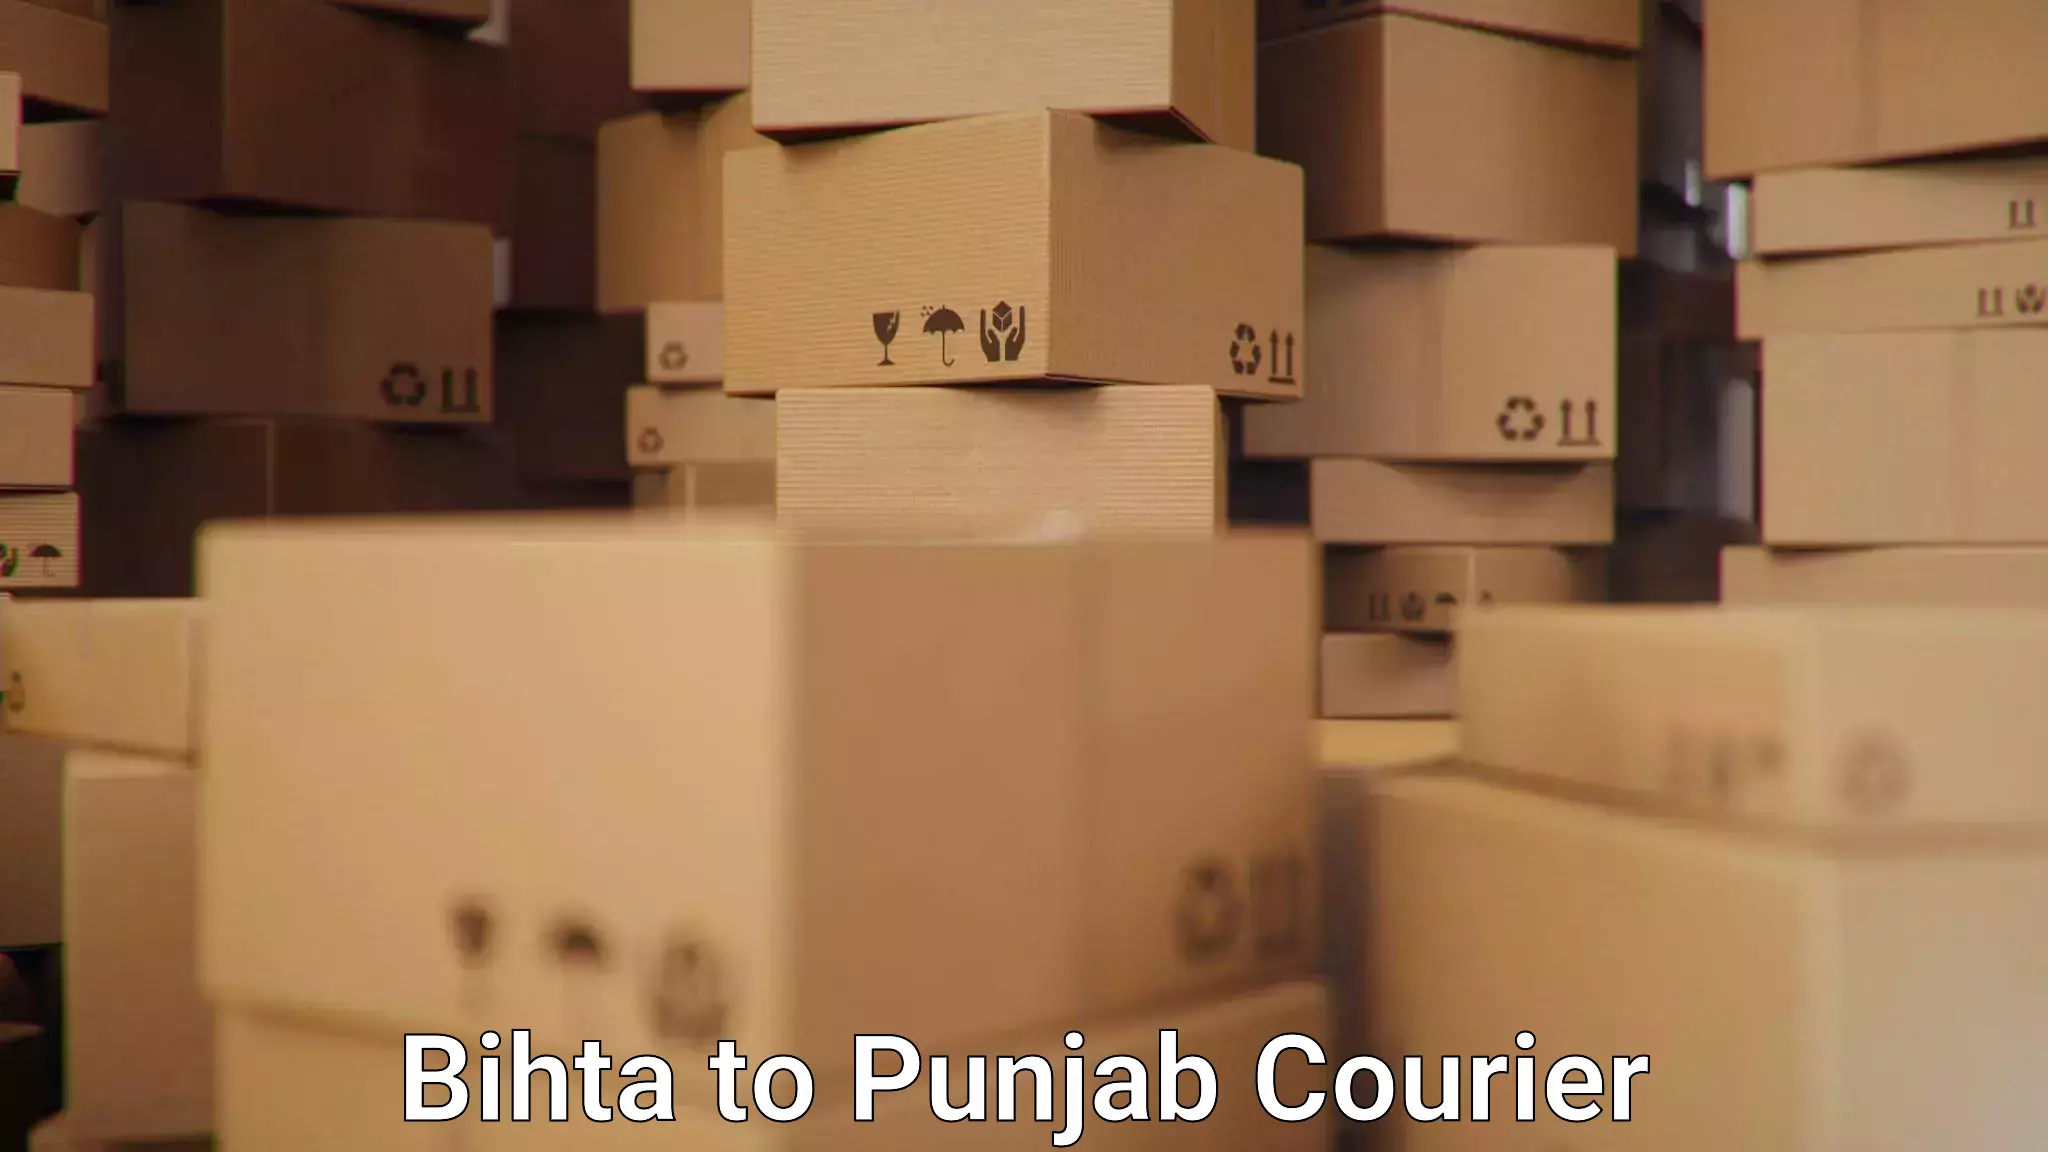 Next-day freight services Bihta to Sultanpur Lodhi